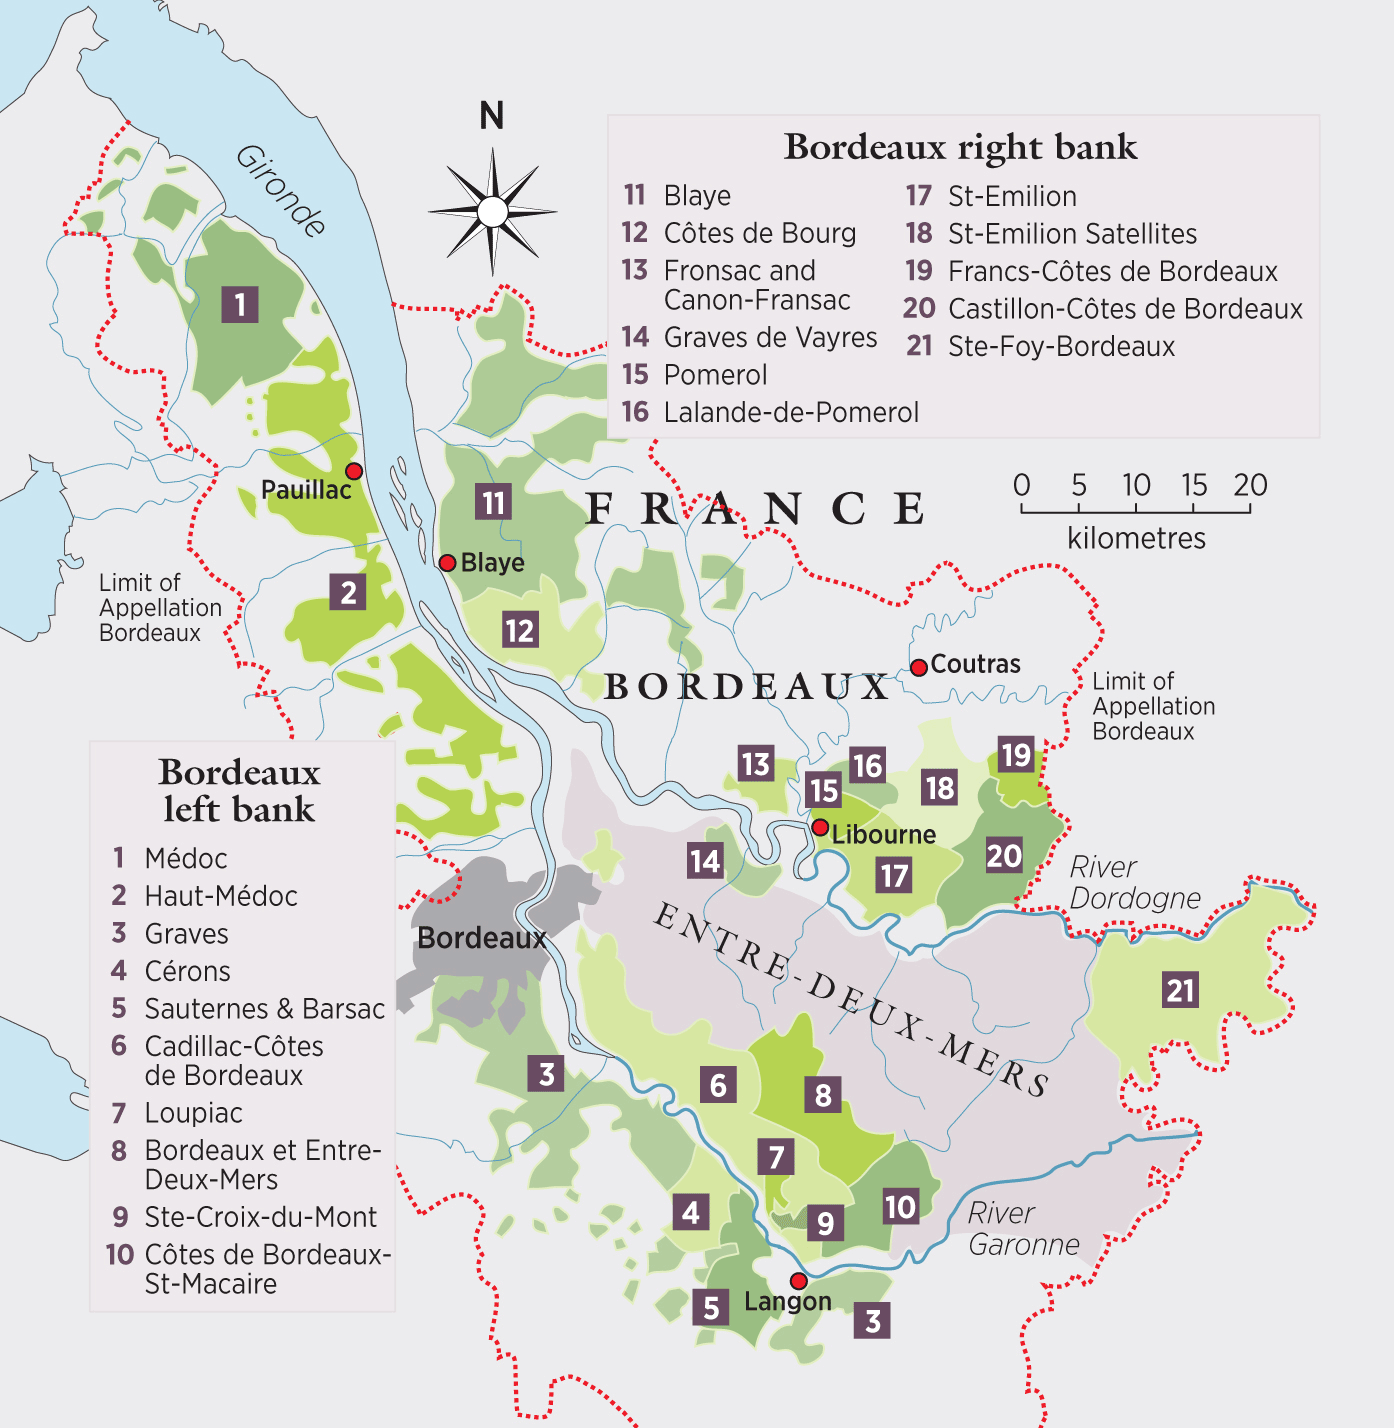 Bordeaux wines: Everything you need to know about the region - Decanter